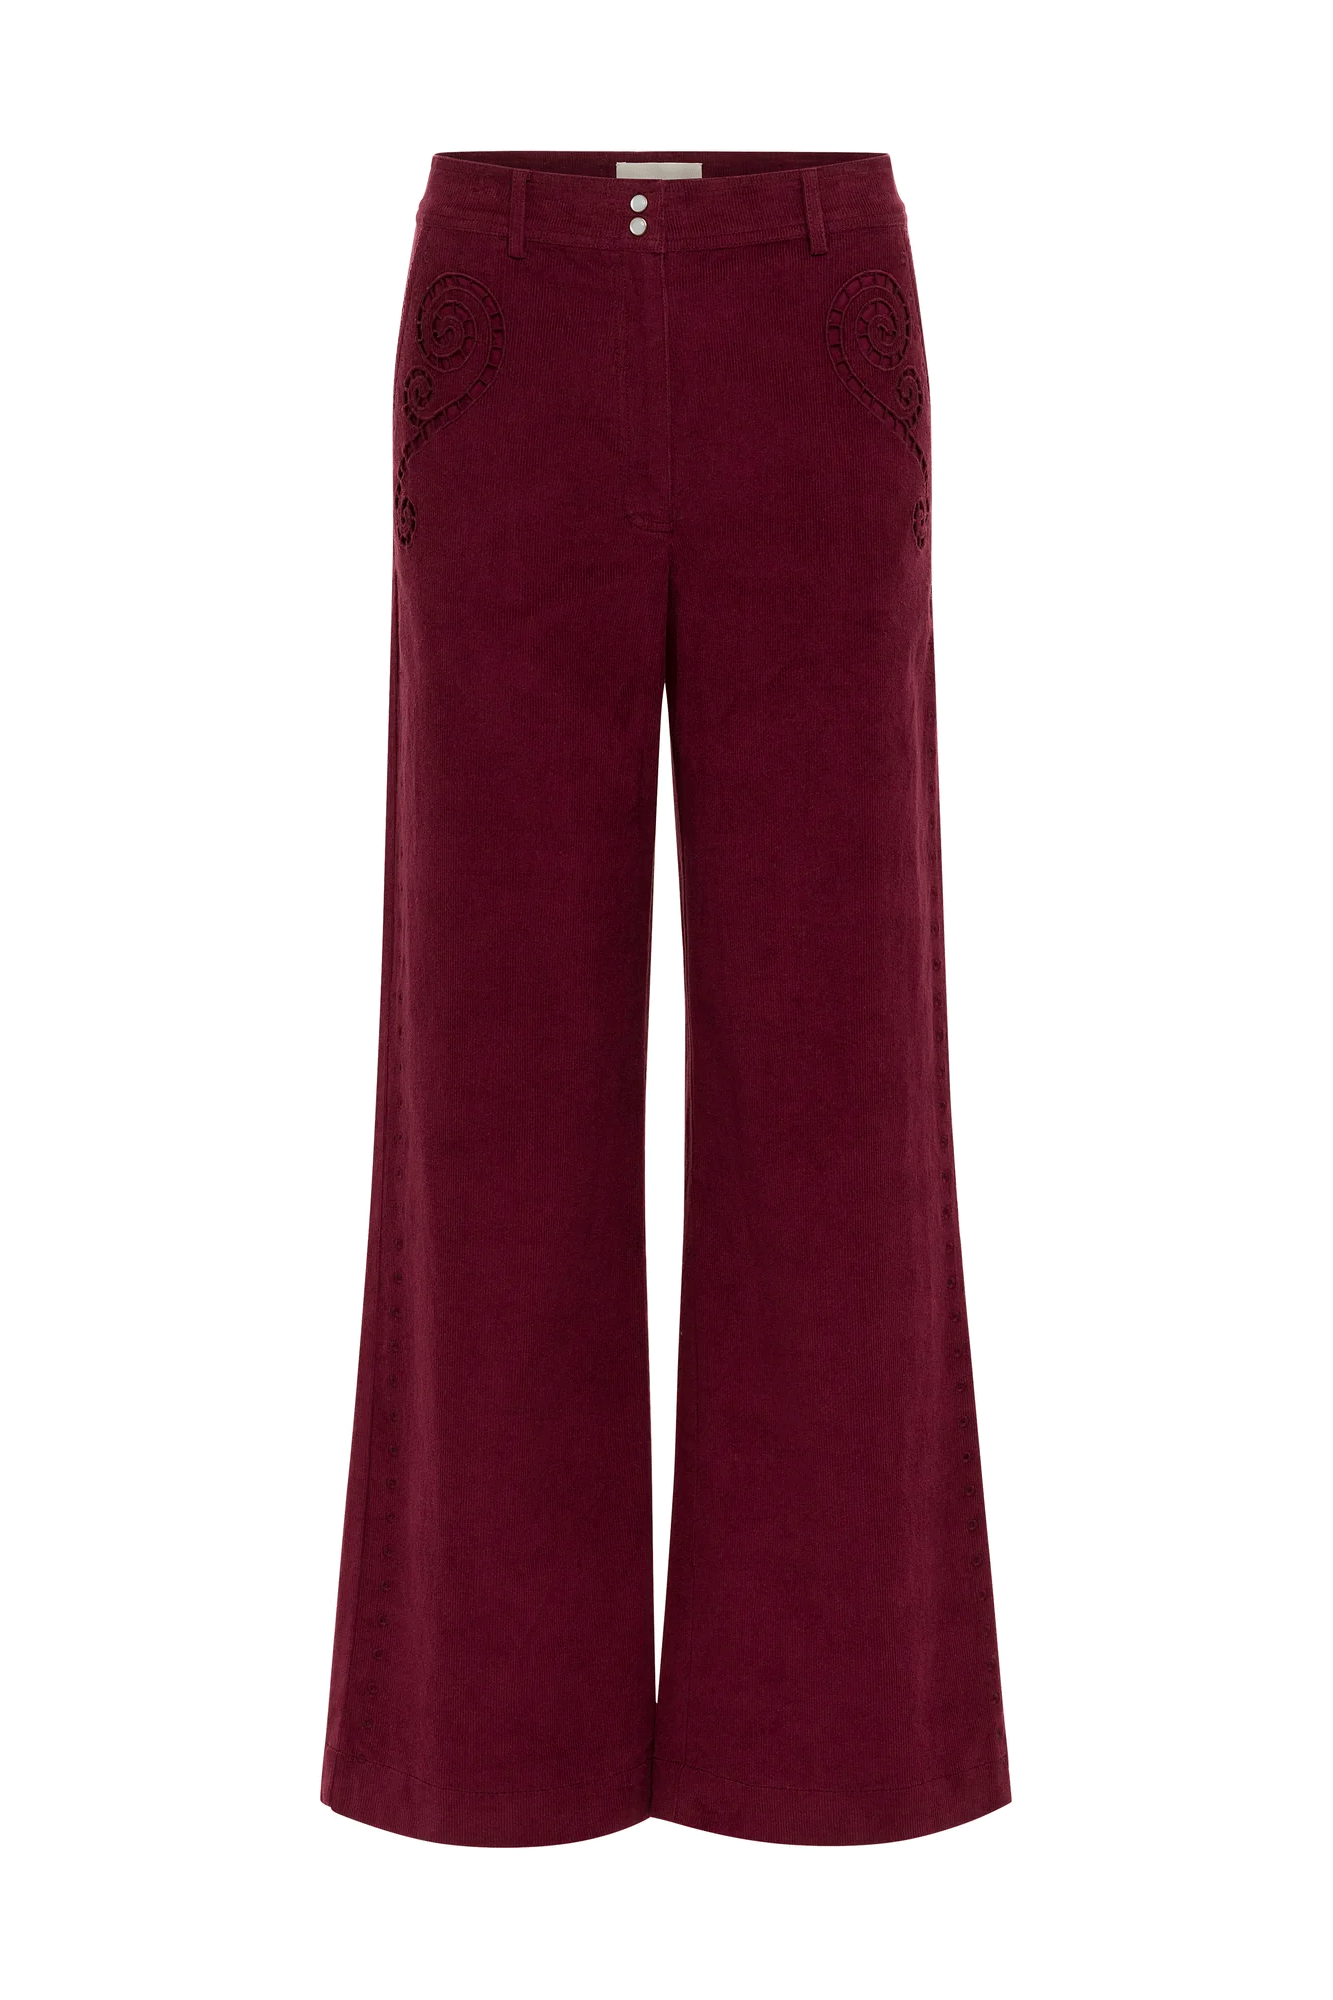 The Sam Pants are statement-making high-waisted trousers with a slightly cropped wide leg and straight hem. Crafted with thoughtfully-selected materials, the Sam Pants offer ultimate comfort and style.